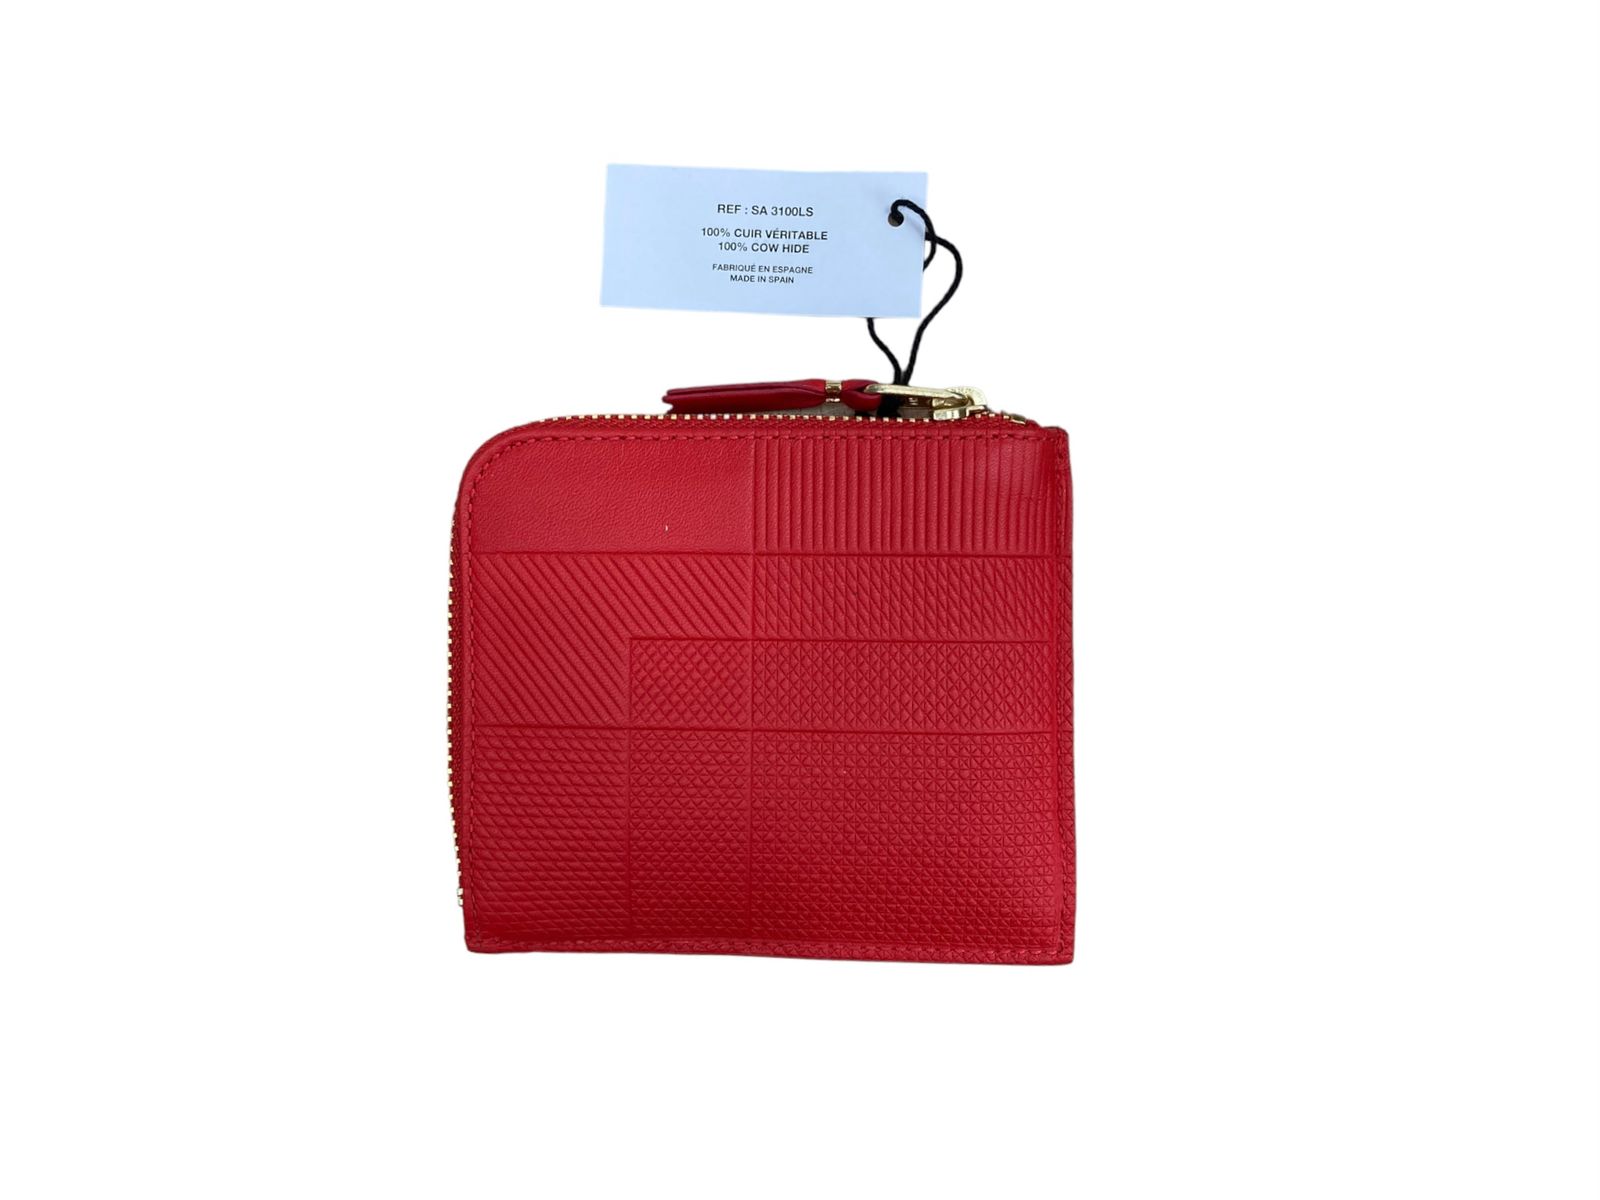 COMME des GARCONS コムデギャルソン INTERSECTION WALLET RD ミニ財布 